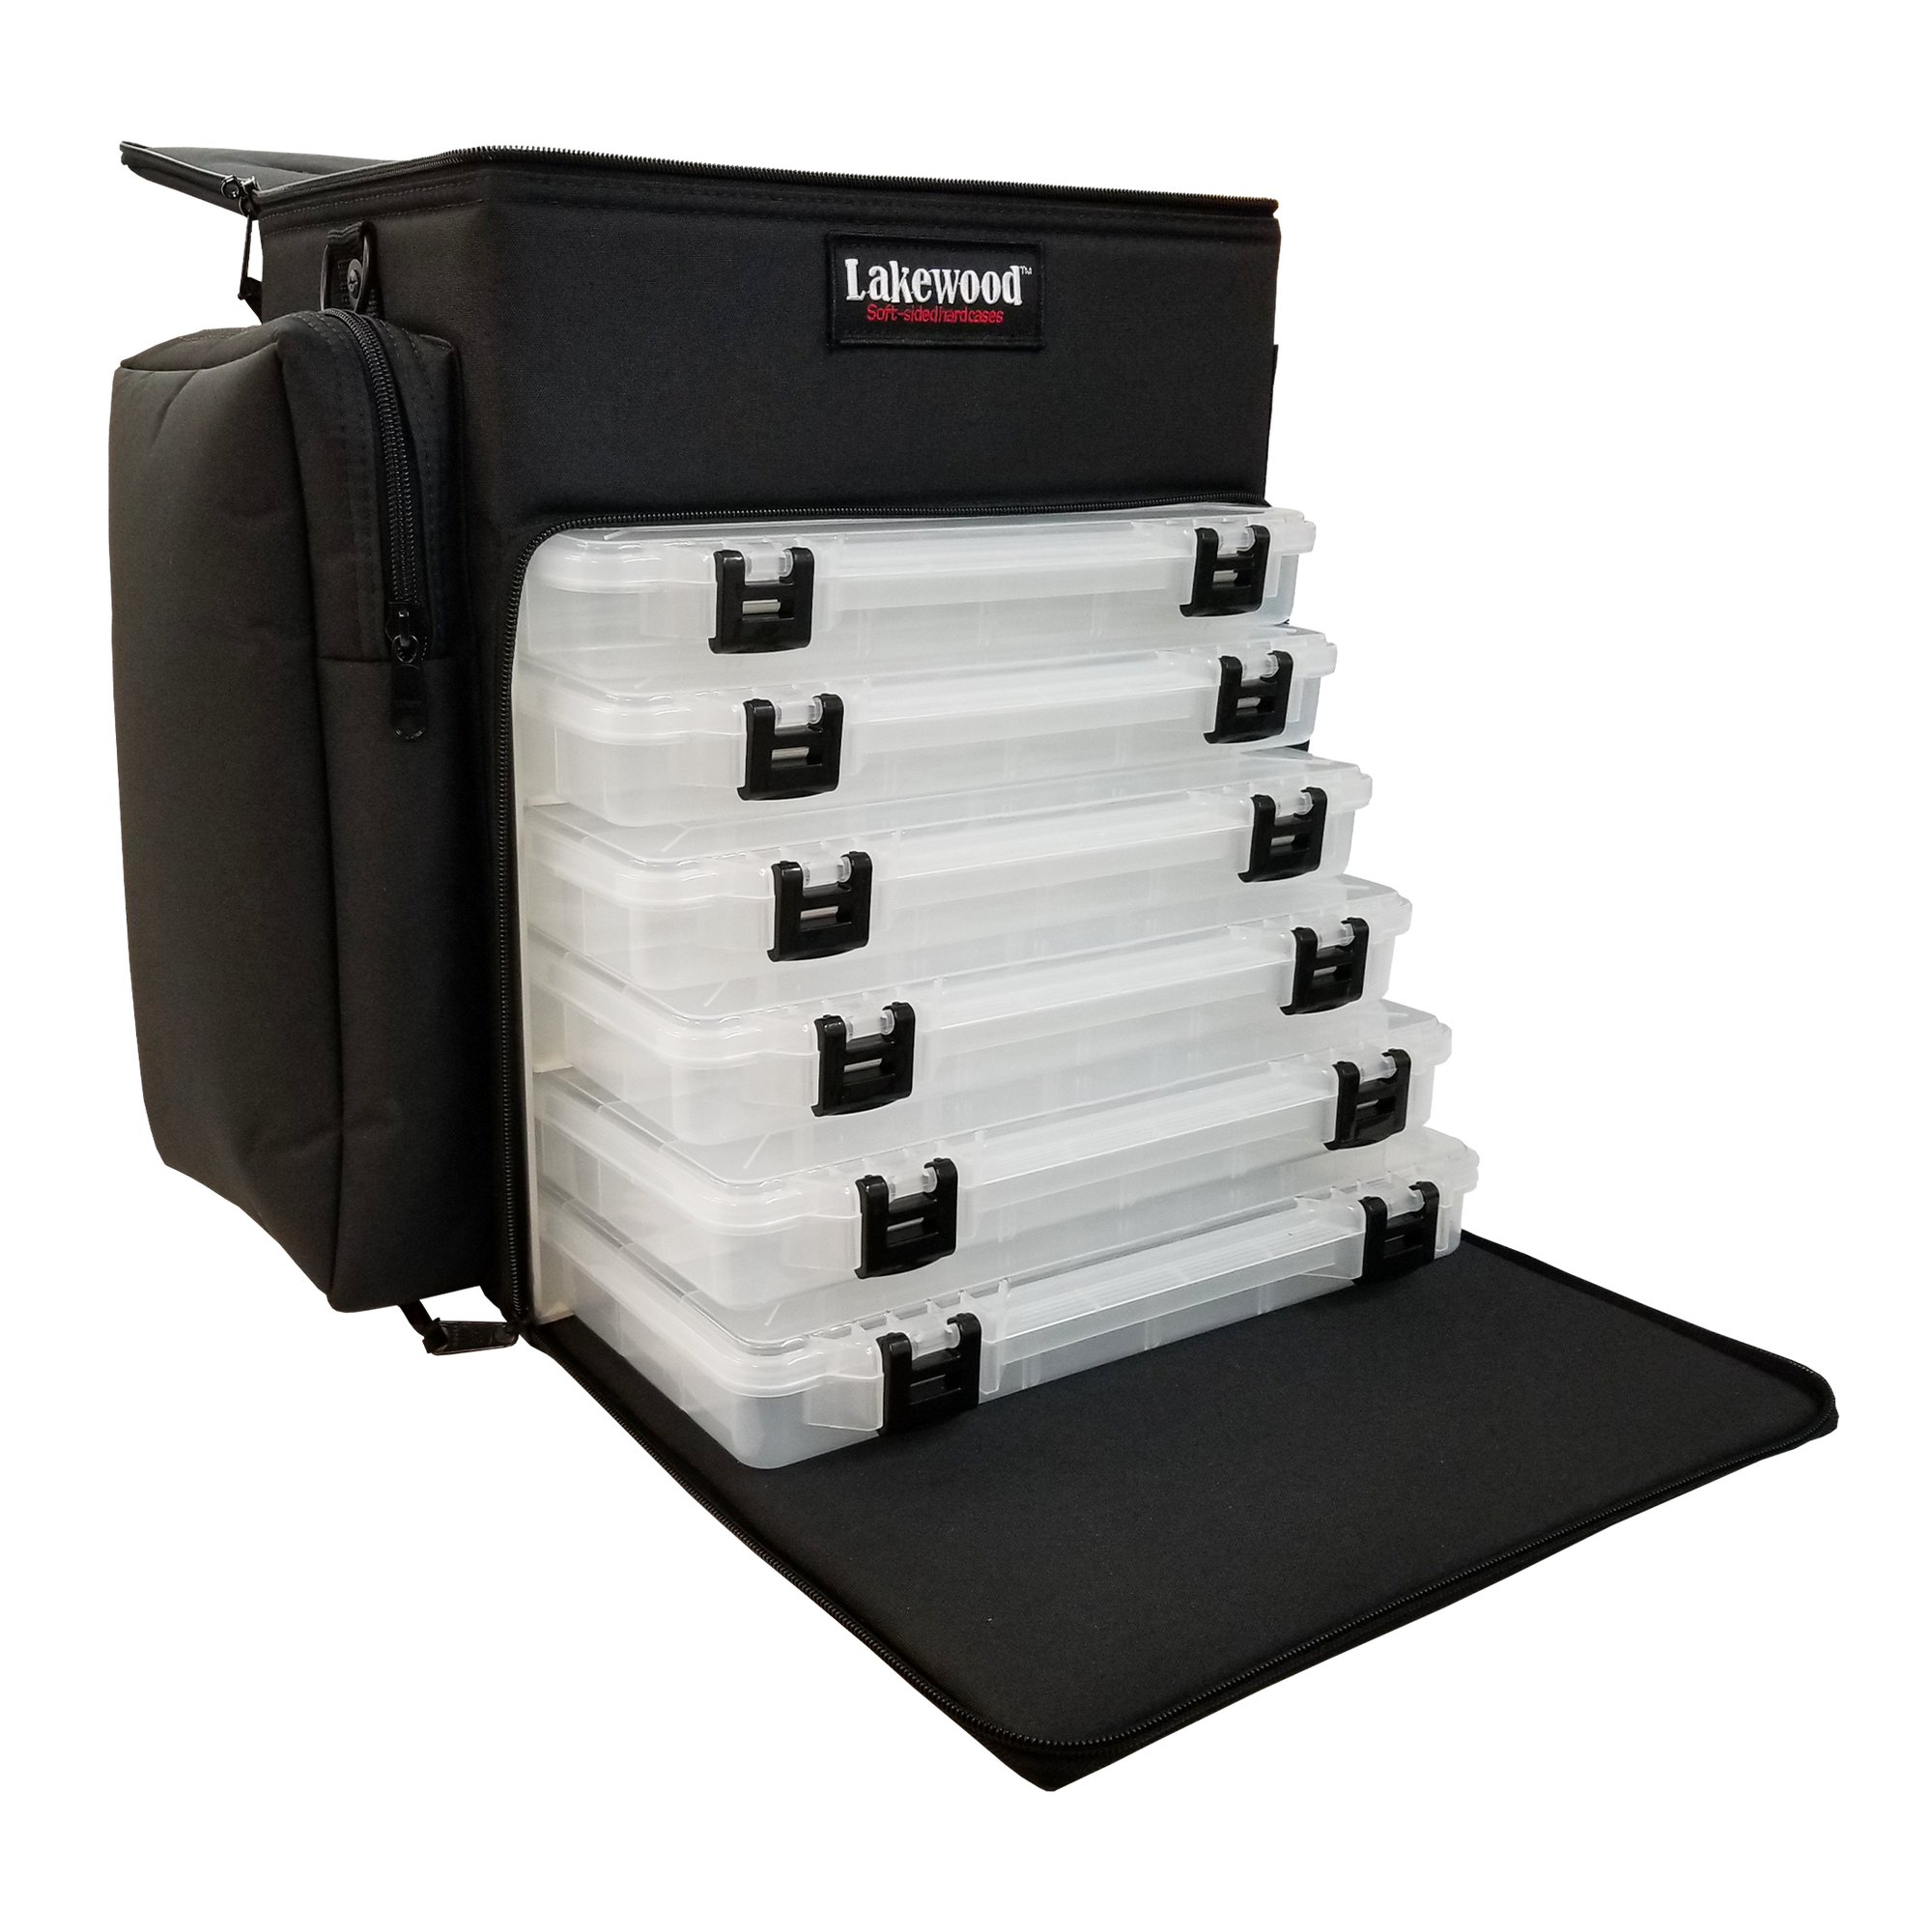 Lakewood Magnum Top Shelf Lakewood Tackle go-anywhere case for all types of fishing and for all seasons! Perfect for all species - walleye, bass, musky, salmon, and more! Holds six 3700 style boxes or three 3730 style storage boxes or mix and match (NOT INCLUDED) Zippered side pockets additional. Made in the USA. Lifetime Warranty.